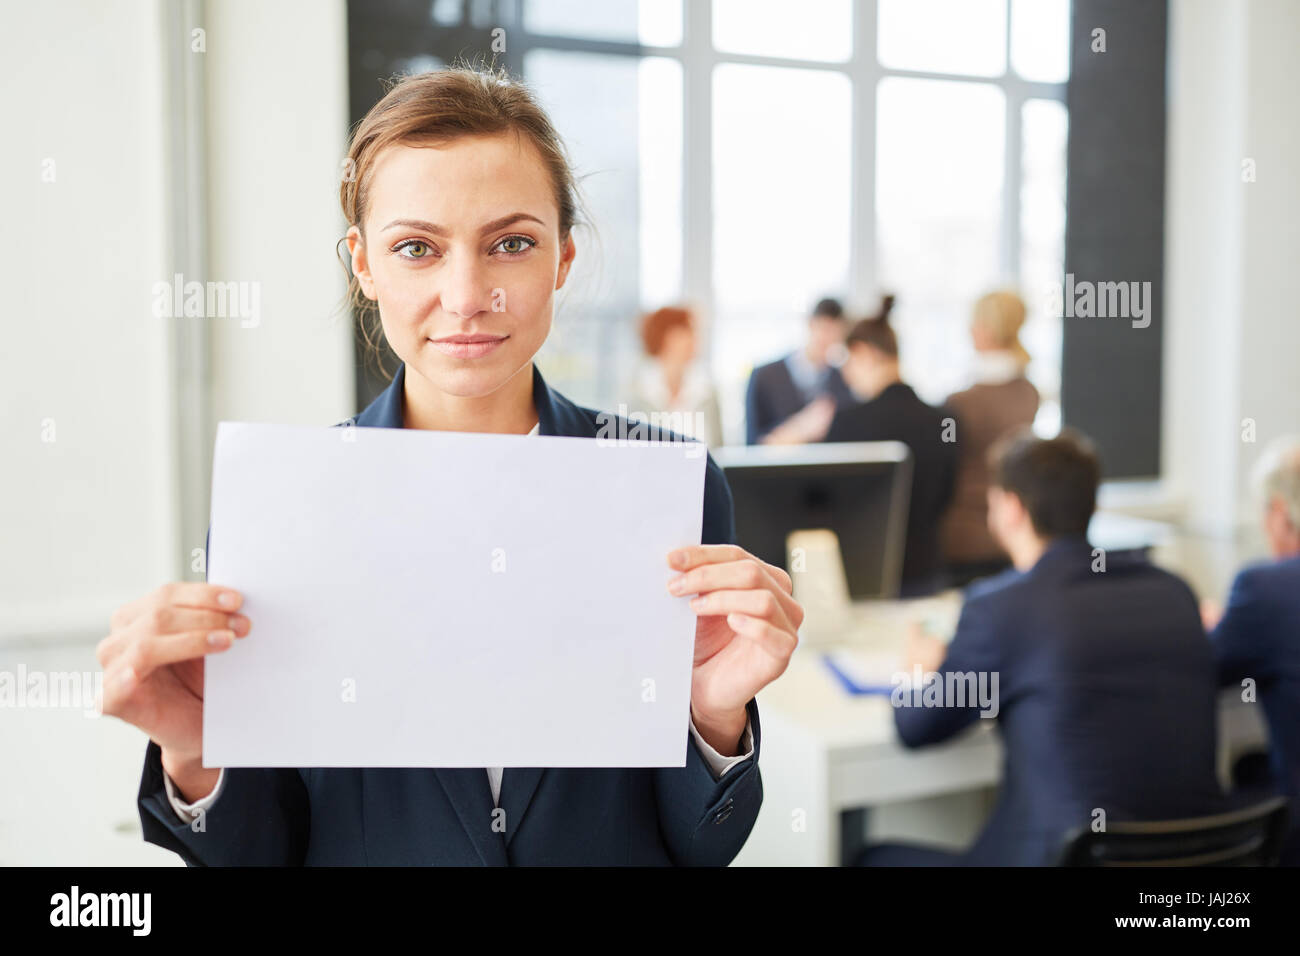 Young business woman holding blank sign in office Stock Photo